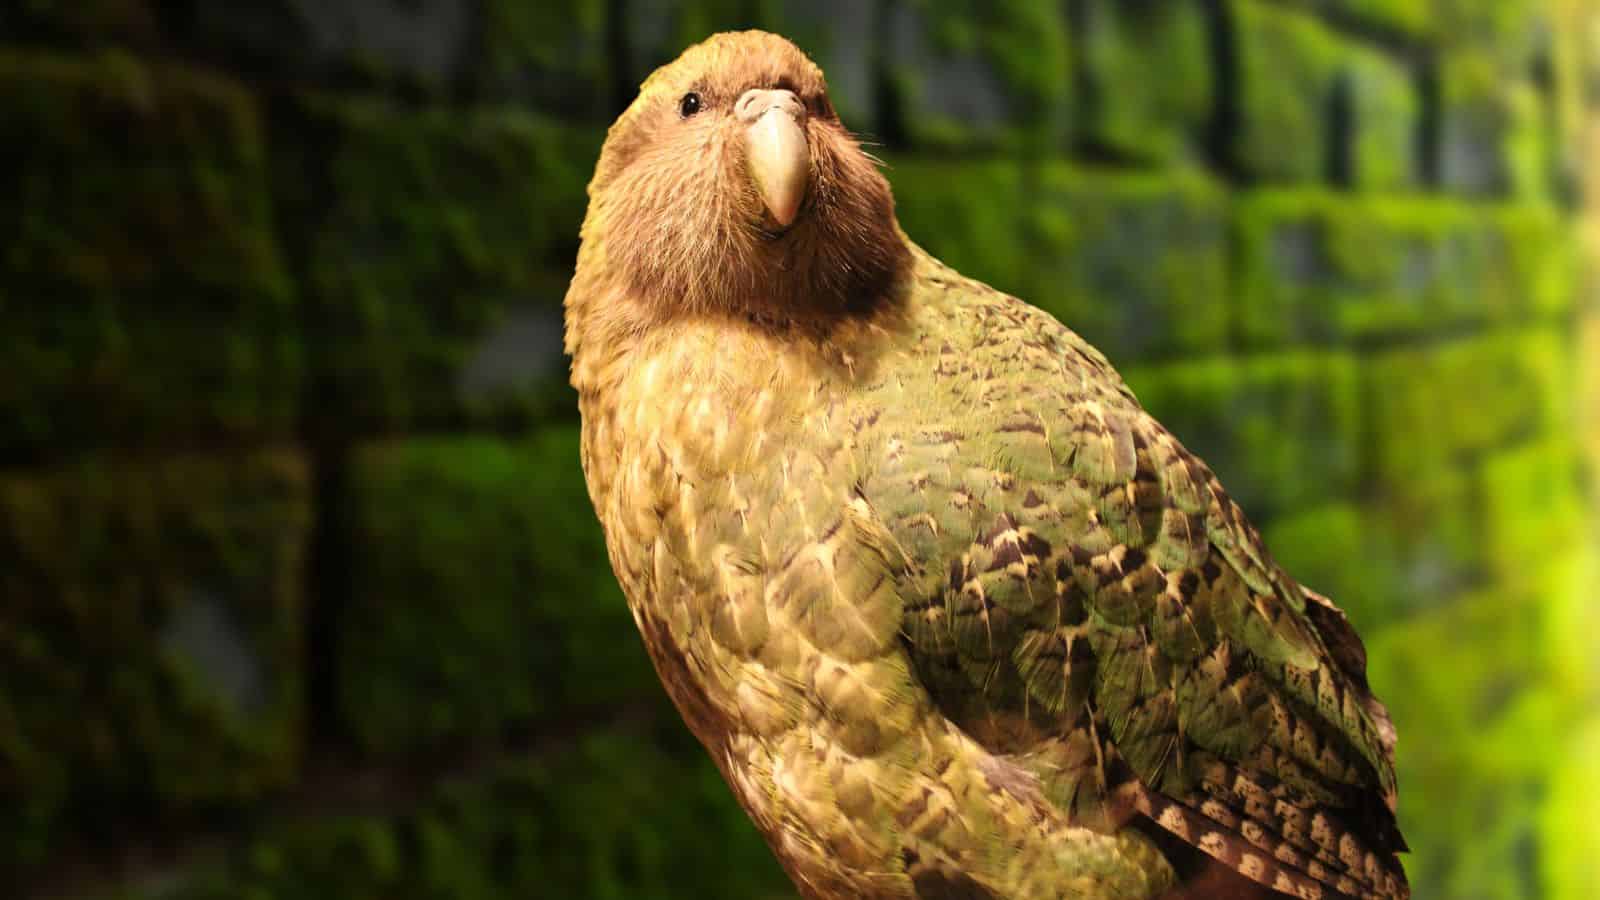 <p><span>Originating from New Zealand, this nocturnal parrot species celebrates unique characteristics such as its musty-sweet odor. The </span><a href="https://www.doc.govt.nz/nature/native-animals/birds/birds-a-z/kakapo/"><span>Department of Conservation</span></a><span> reports that there are only 247 left today, making them one of New Zealand’s rarest animals. Some conservation efforts have steadily increased the numbers of kakapo birds across the country, although the species still faces ongoing challenges of genetic diversity. </span></p>